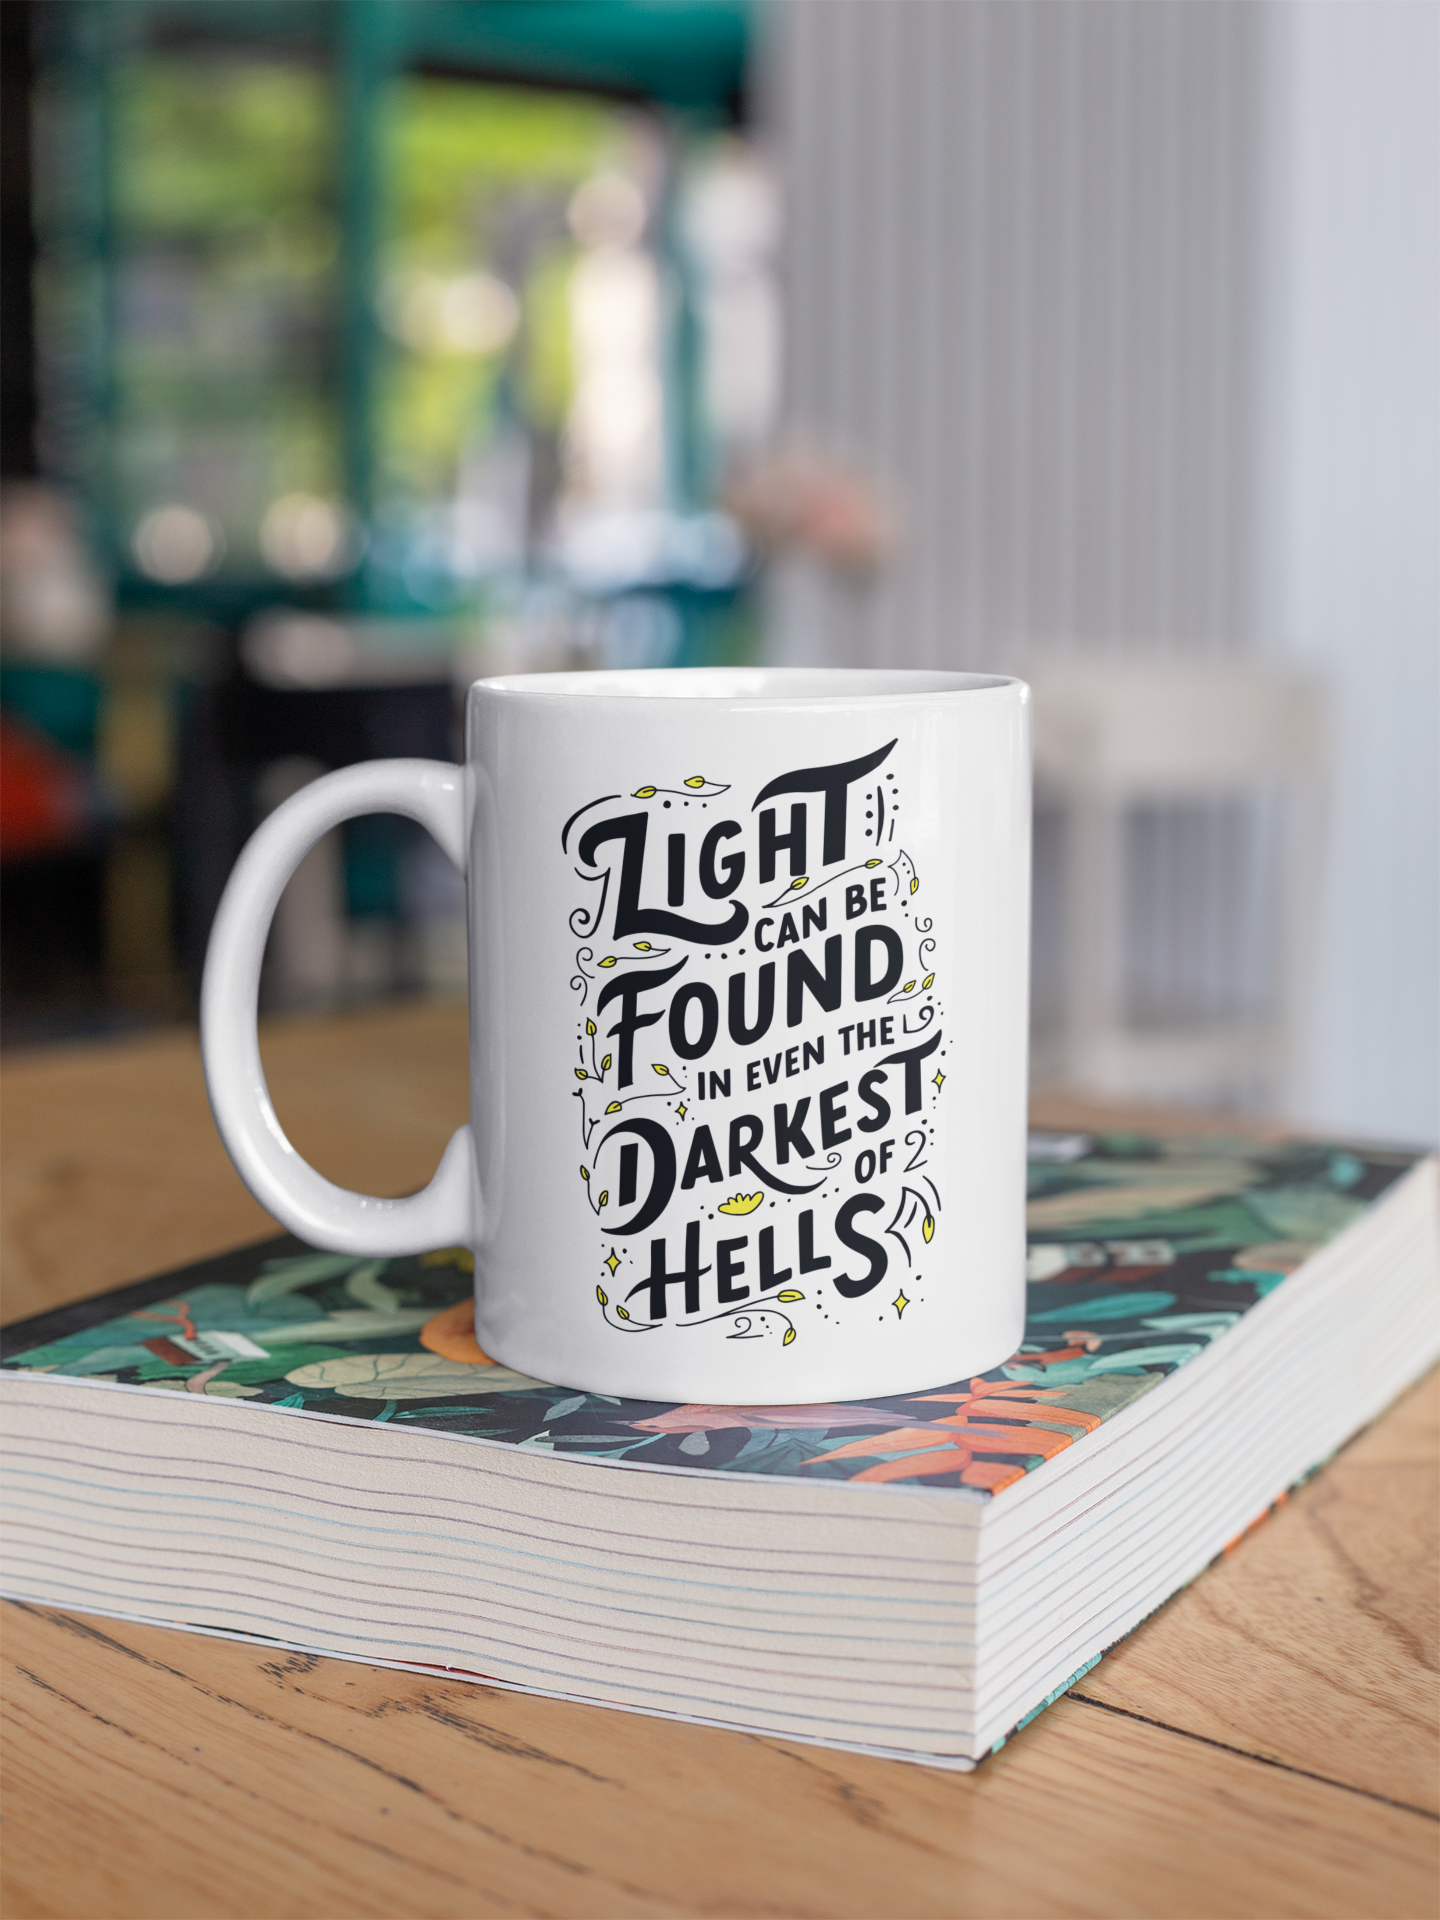 Light can be found even in the darkest of hells - Mug - A Court of Mist and Fury - Sarah J Maas - Officially Licenced